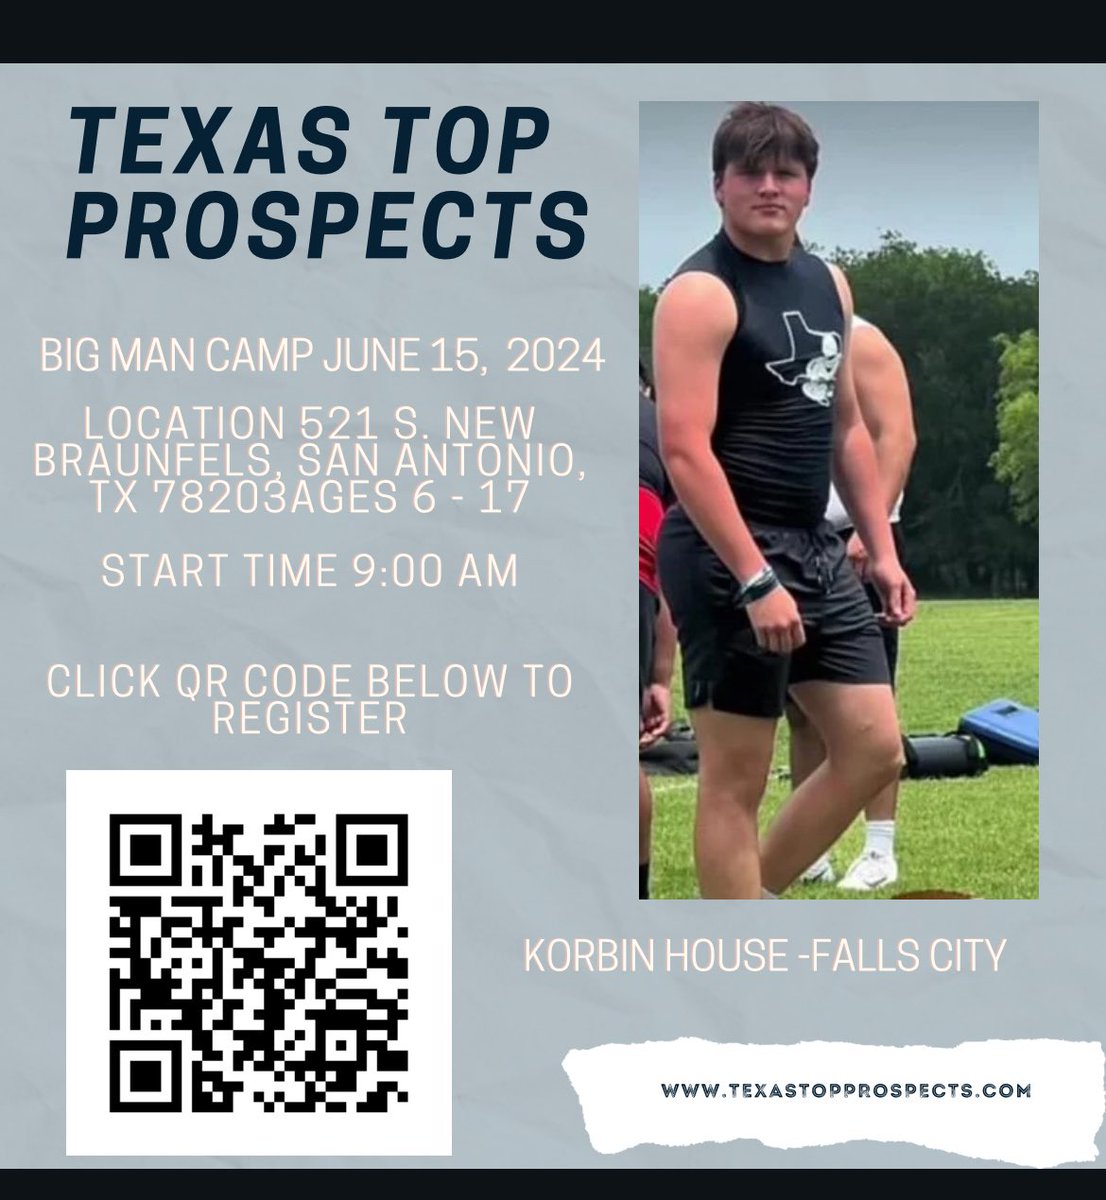 June 15,2024 Here is our Big Man Camp taking place at St Gerard. Ages 6-17 This will be our 6th Big Man Camp we will be hosting. @SouthsideSATX @PremierEventsU2 @RevengOfThe4th @TXTopTalent @TXHS_Football Link to register: forms.gle/mE9ynC6kWPj7hY…